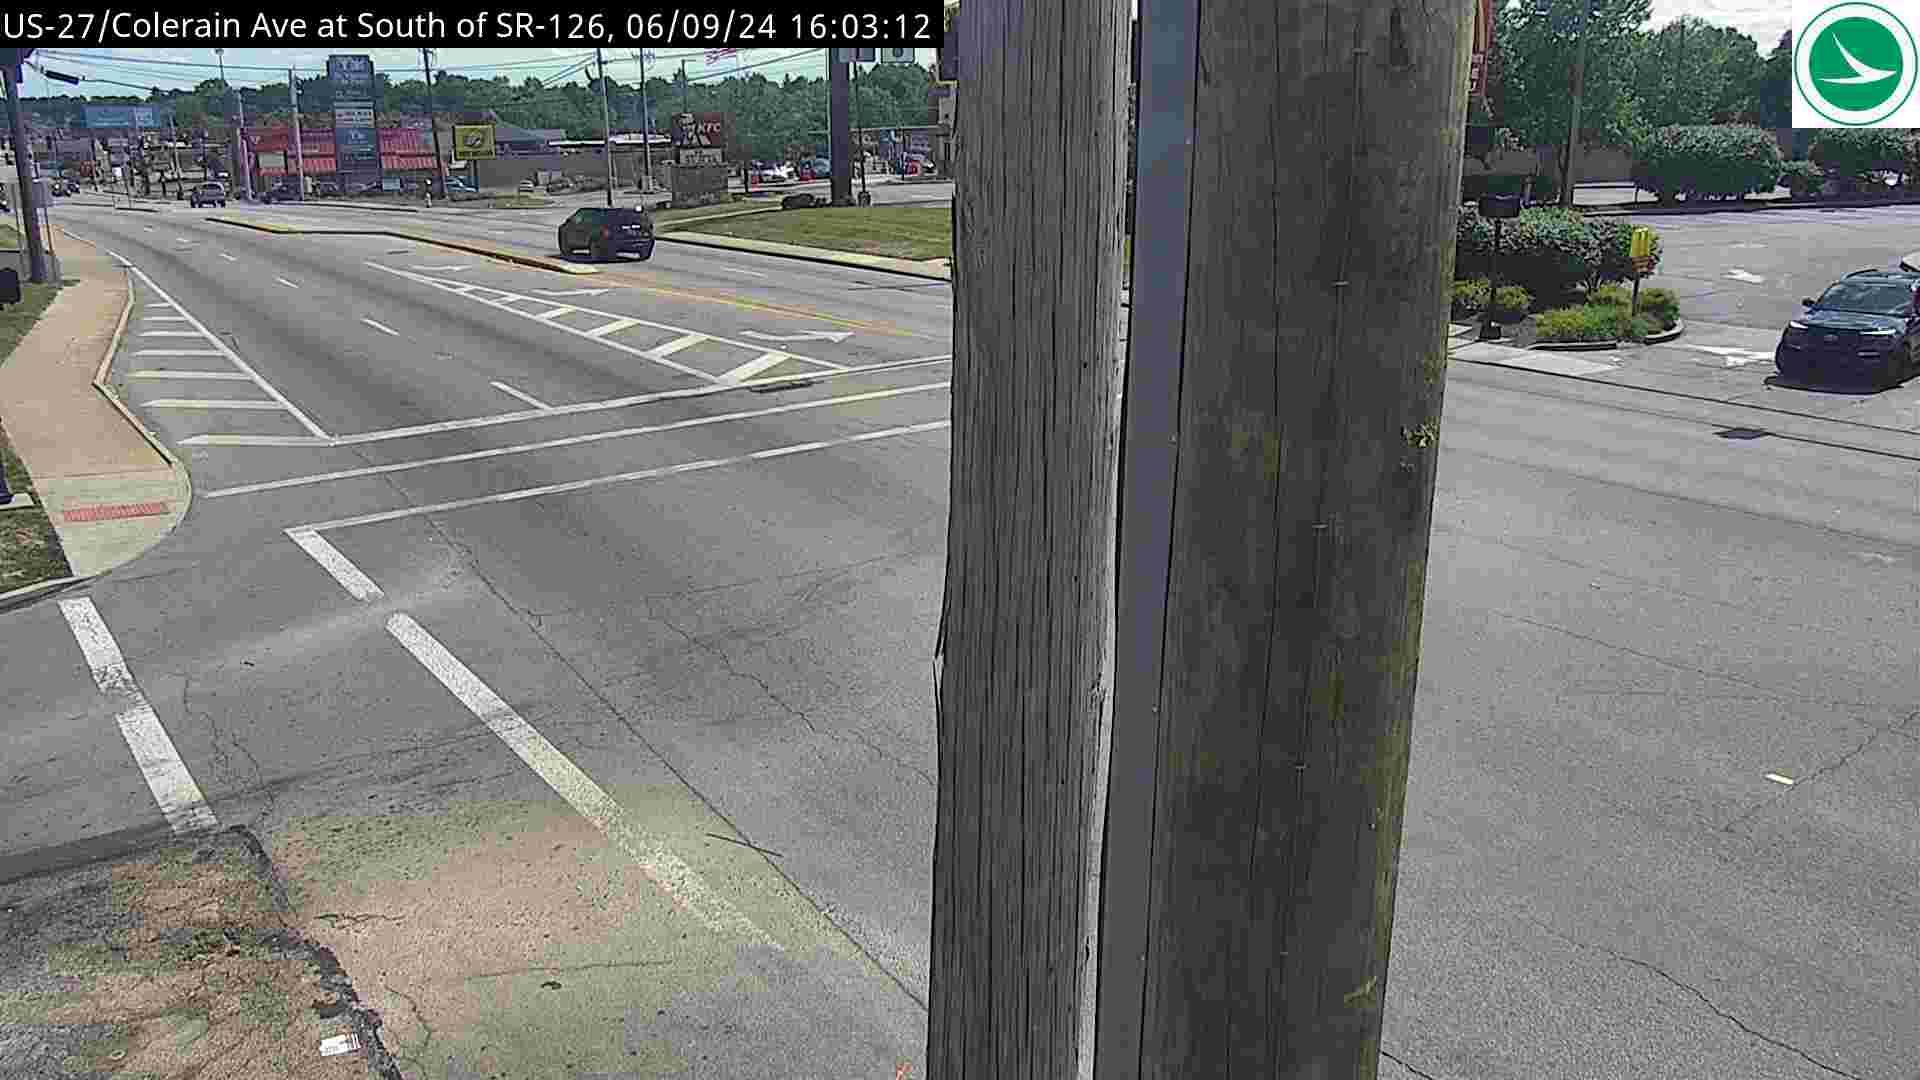 Traffic Cam Groesbeck: US-27 - Colerain Ave at South of SR-126